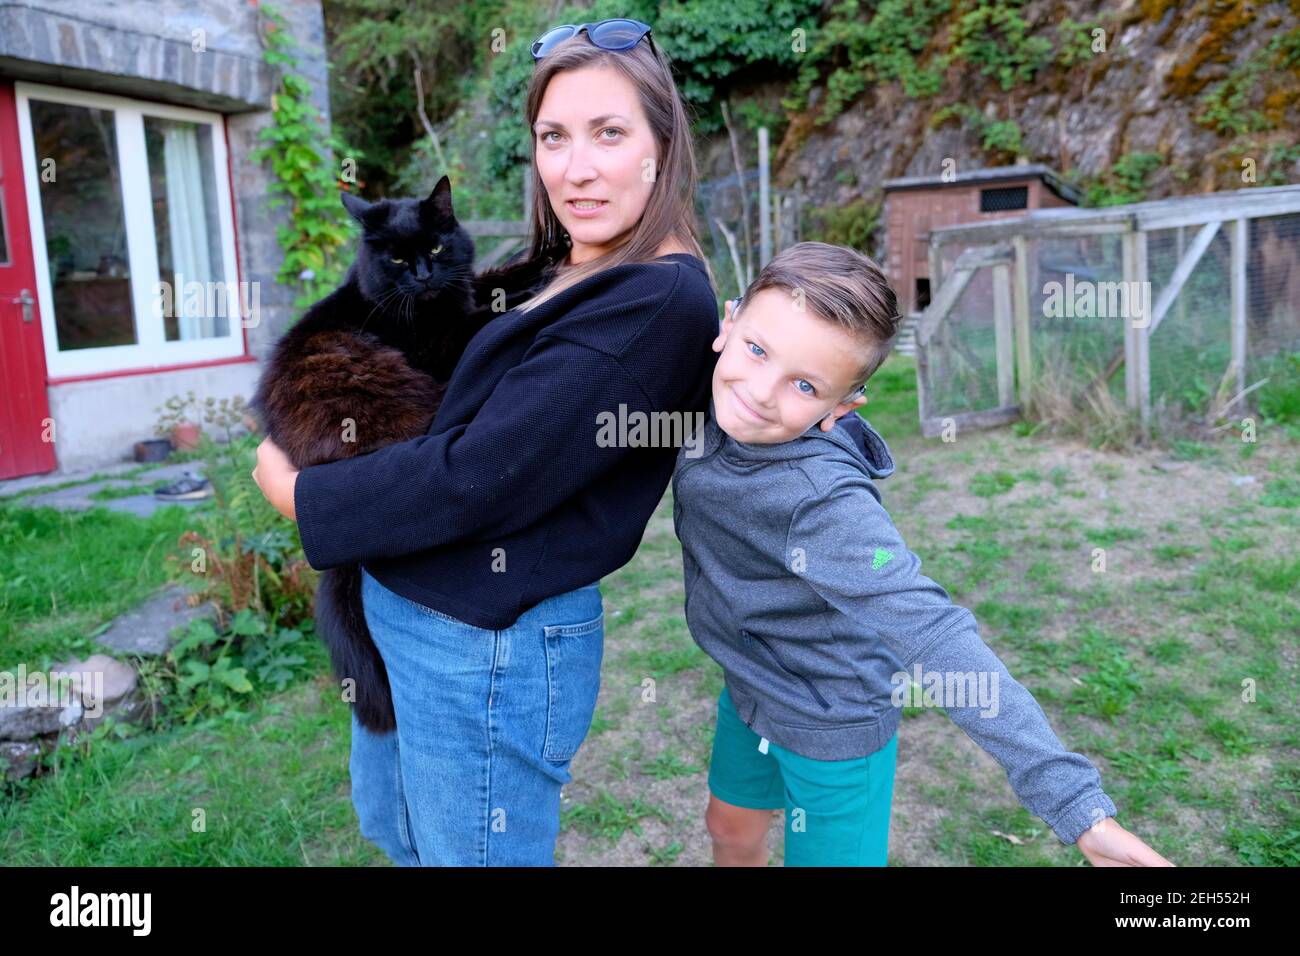 Woman holding black cat mother and boy son child looking at camera posing having fun making silly facial expressions outside in garden UK KATHY DEWITT Stock Photo